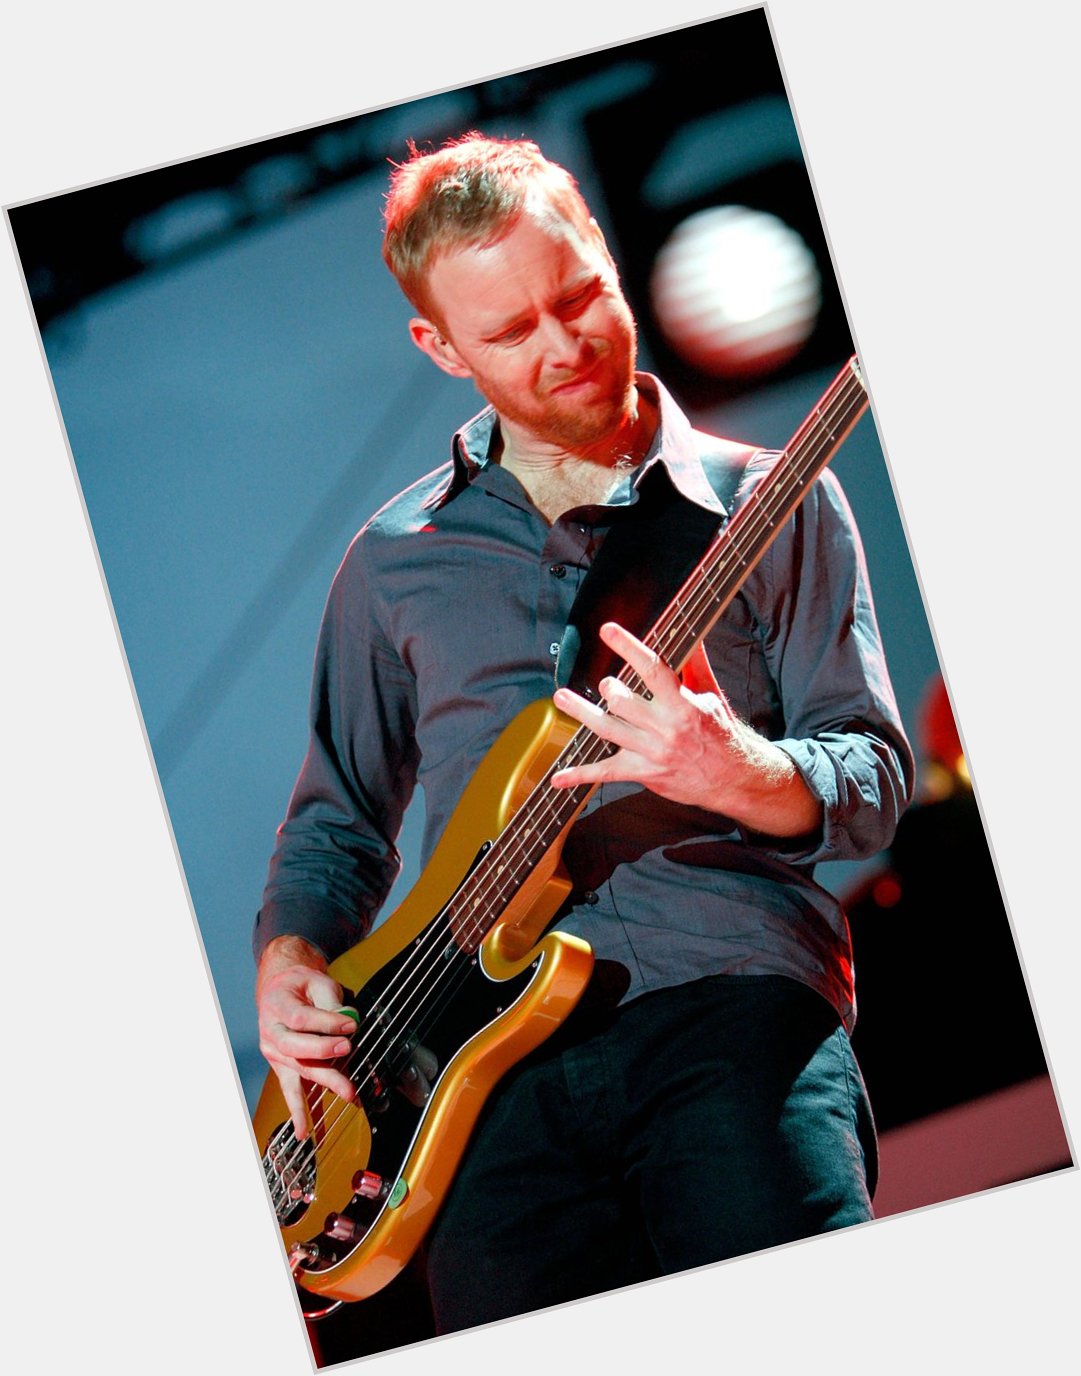 Happy birthday to Nate Mendel of Sunny Day Real Estate and the Foo Fighters. 